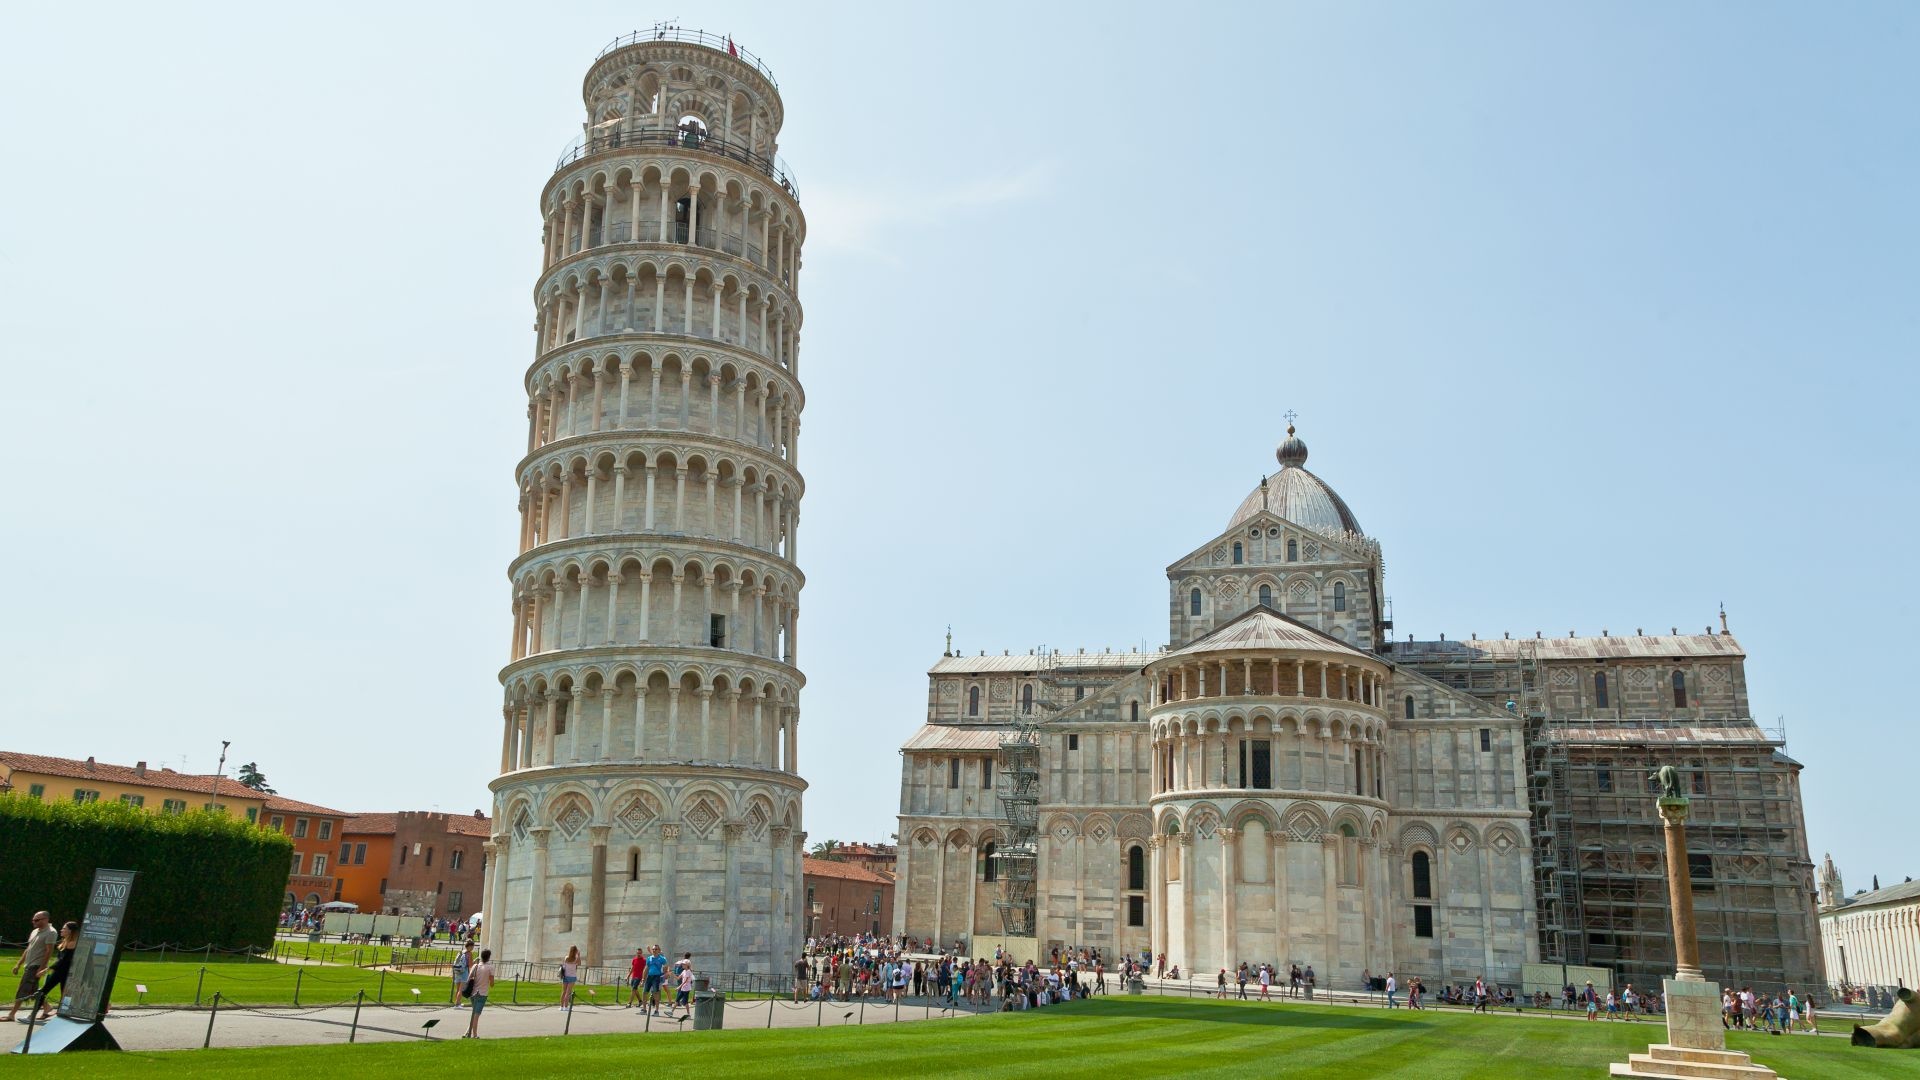 Popular travel spot, Tower of Pisa, Tourist attraction, Cultural significance, 1920x1080 Full HD Desktop